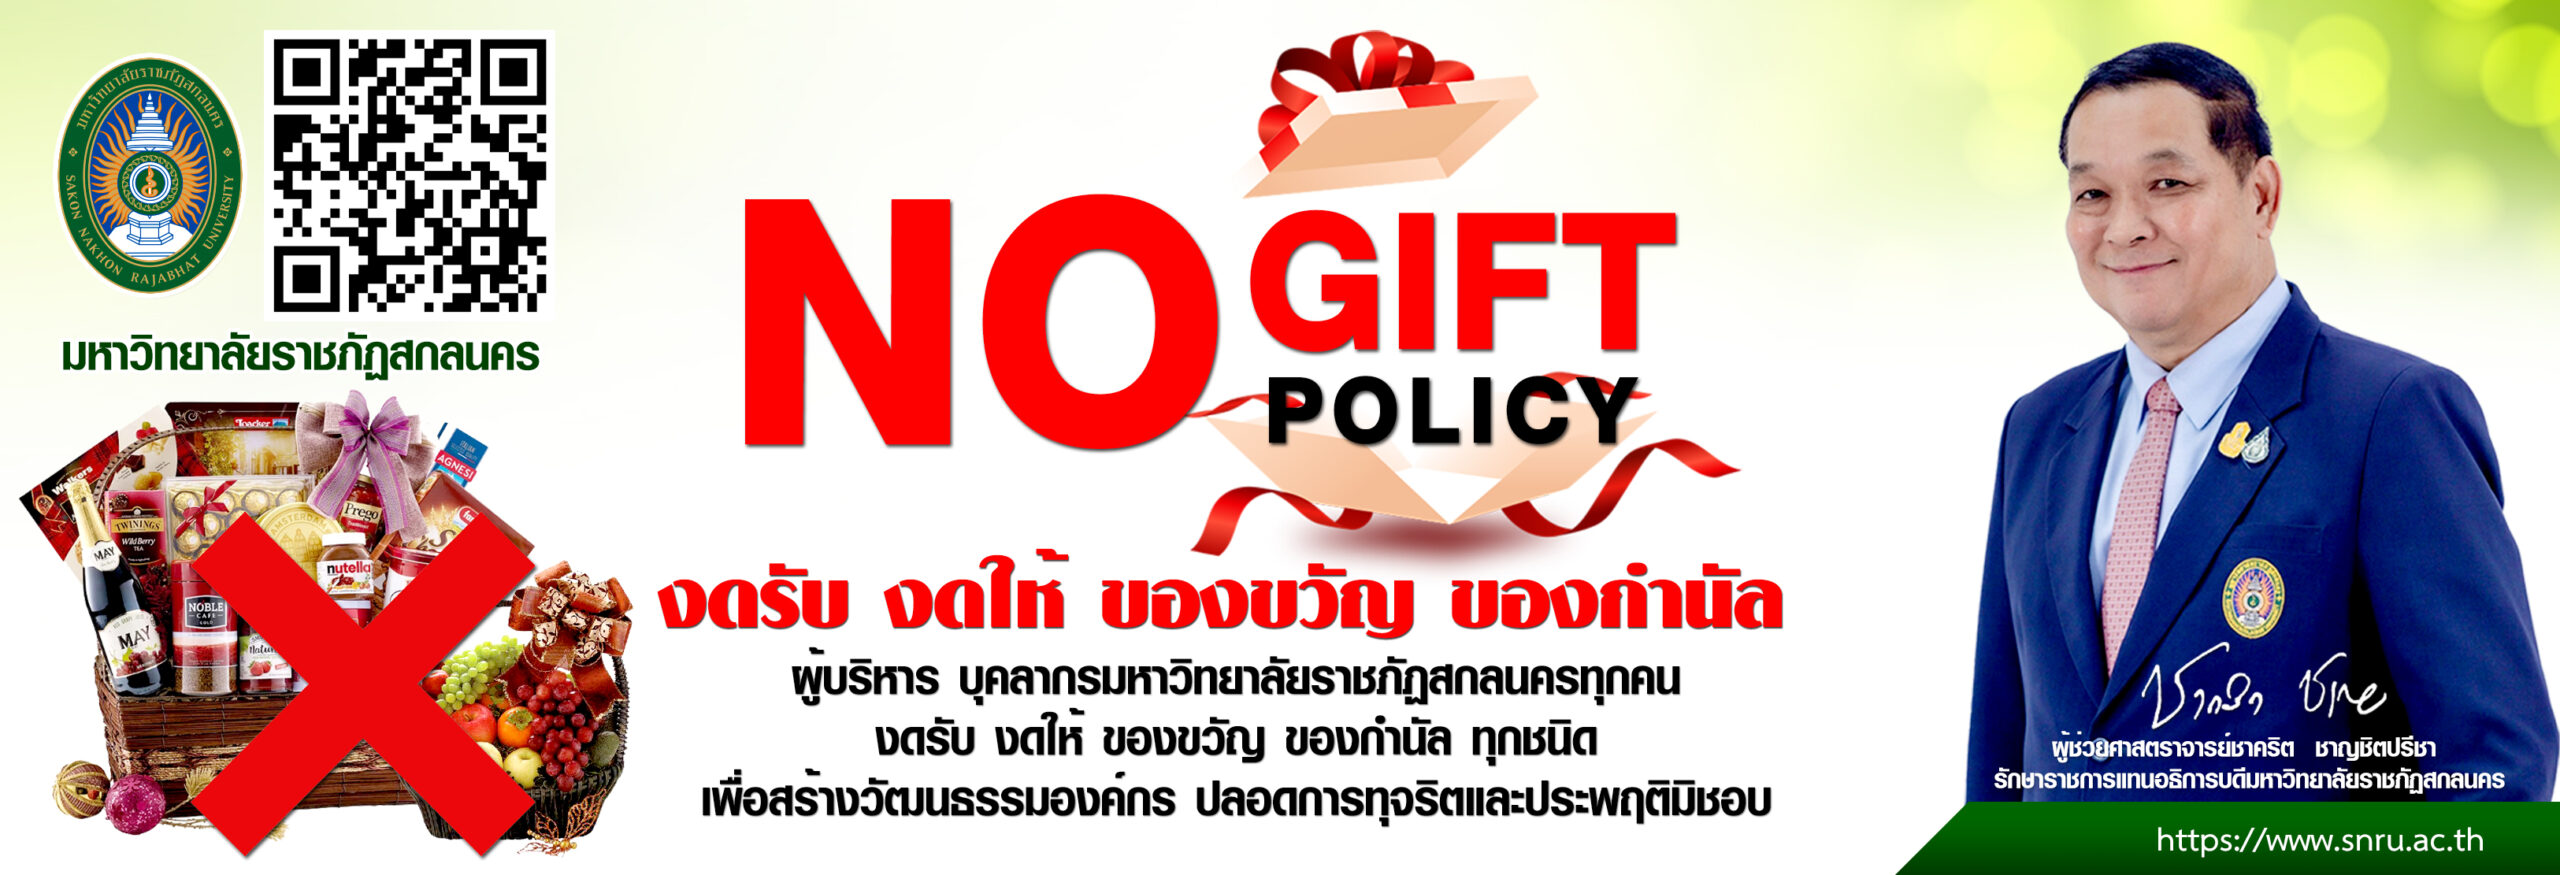 No GIFT POLICY